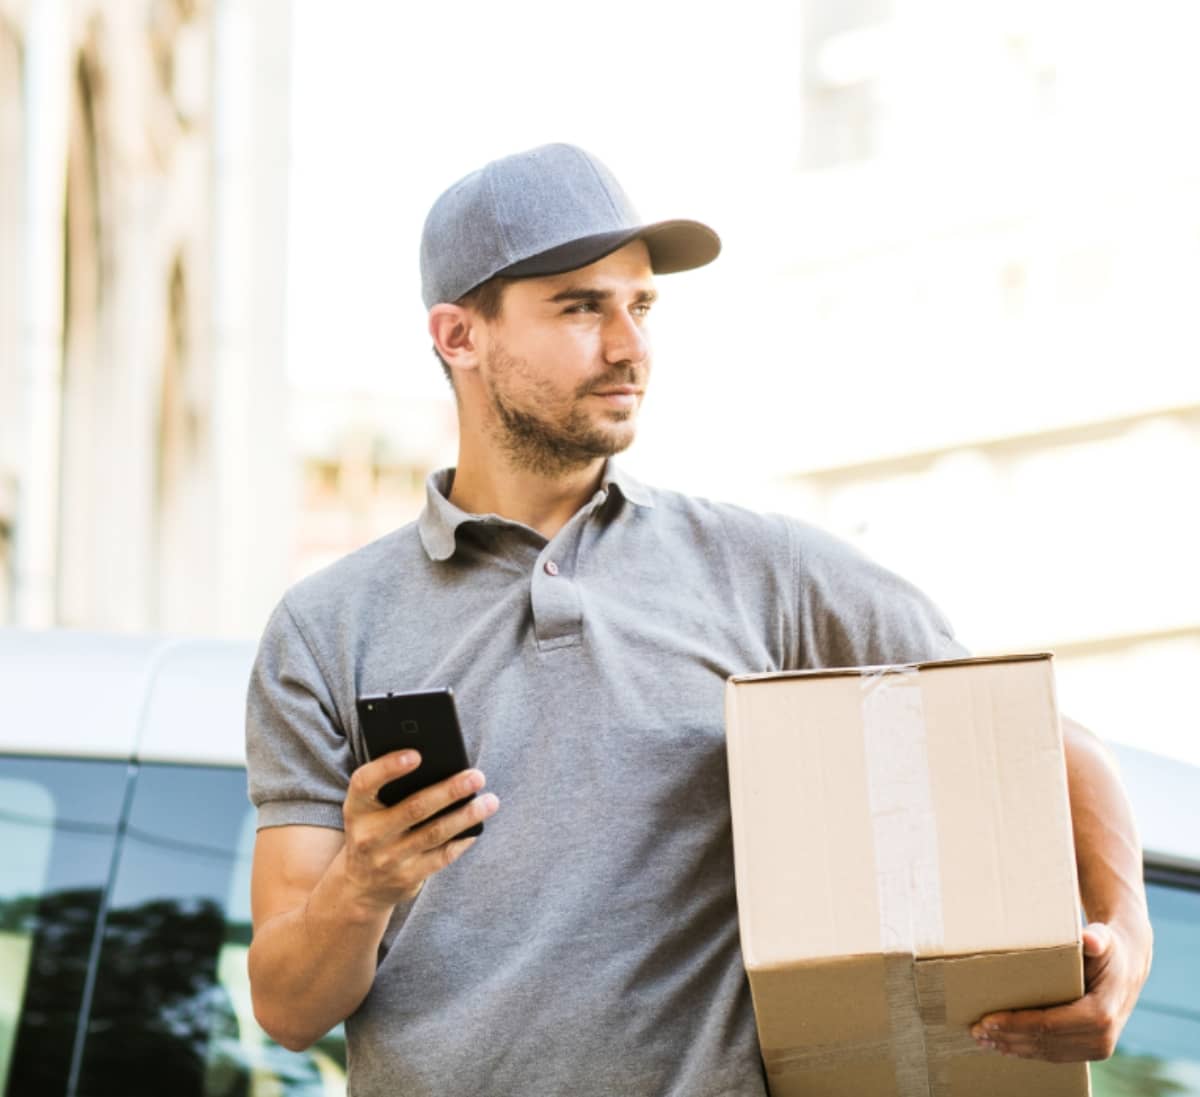 Problems and Challenges For Hyperlocal Delivery App